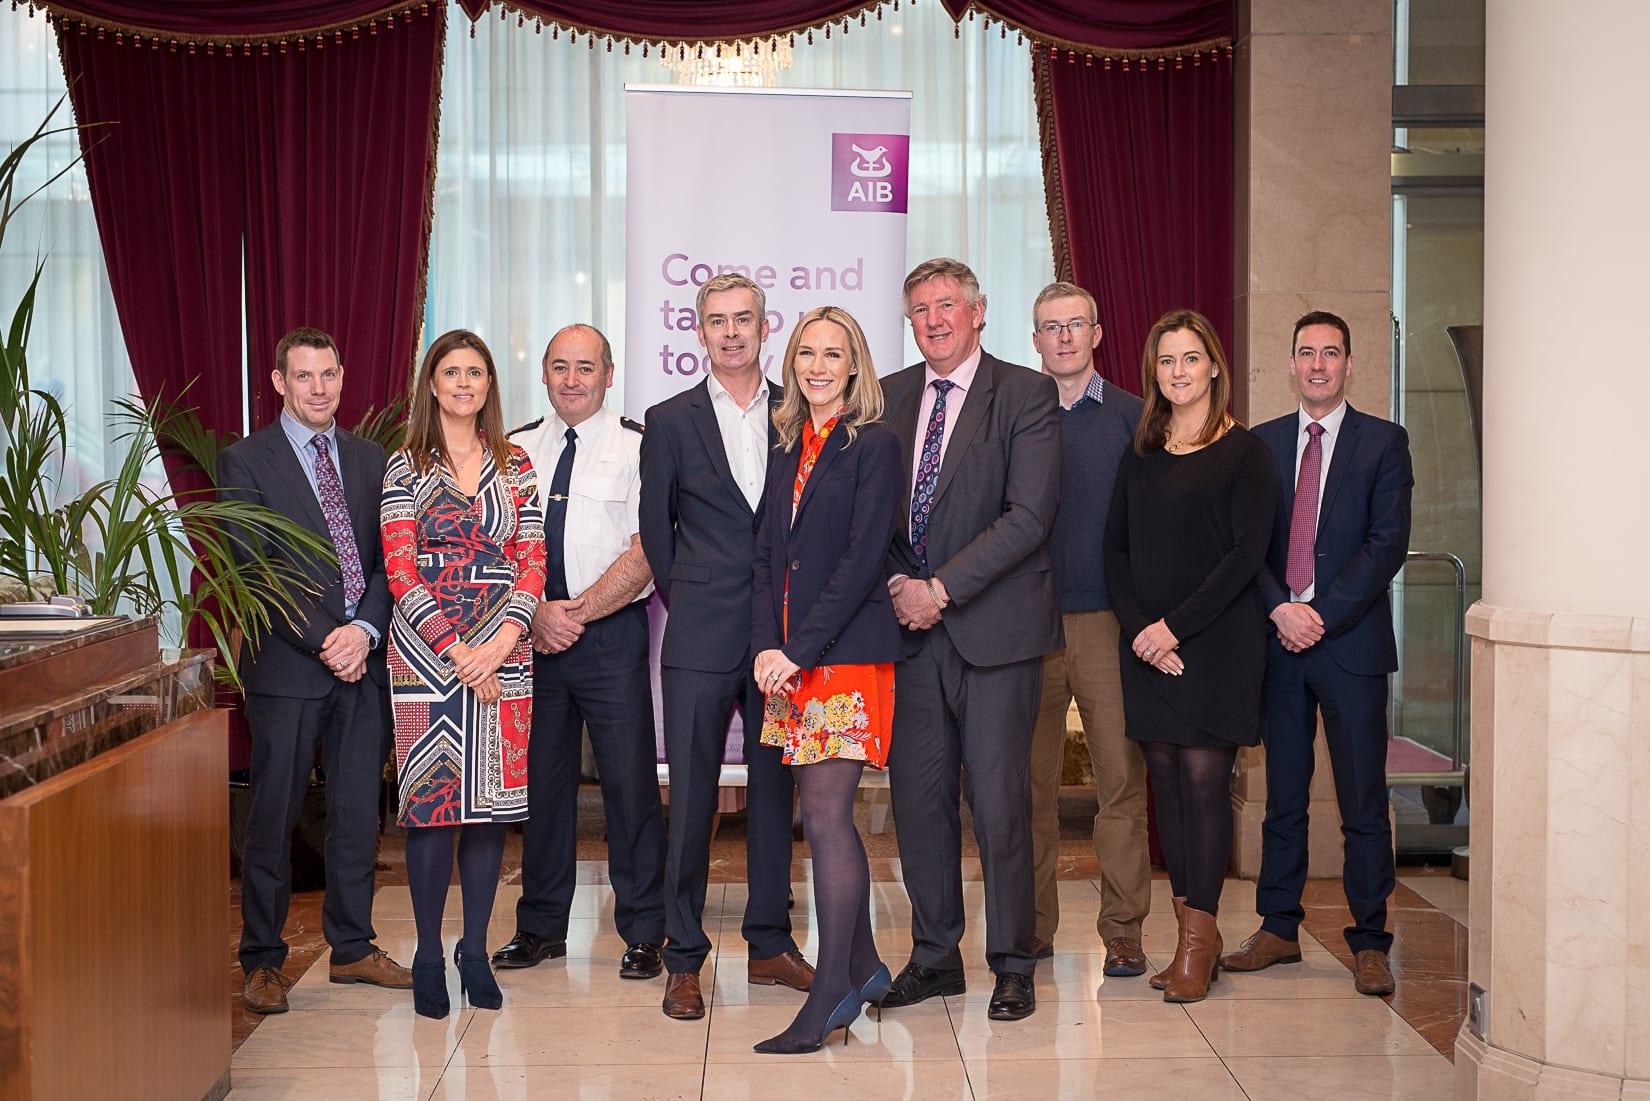 no repro fee- newspaper000 and 001
No repro fee- At the Limerick Chamber business briefing on ‘Spending Trends: Tourism, Retail &  Hospitality Industry Insights & Marketing Trends’ at the Savoy Hotel - 22-01-2019, From Left to Right: David McCarthy, Head of Tourism & Retail -AIB, Orla O’Connor - Web Co-Ordinator, Limerick City and County Council, Superintendent Derek Smart -An Garda Síochána, David Fitzsimons- Retail Excellence Ireland, Deirdre Ryan - CEO Limerick Chamber, Dermot Graham -Business Banking AIB / Sponsor, Eamon Gardiner - Limerick Chamber Skillnet / Sponsor, Linda Breen - An Garda Siochana Henry Street, Niall O’Callaghan -Managing Director Shannon Heritage. 
Photo credit Shauna Kennedy